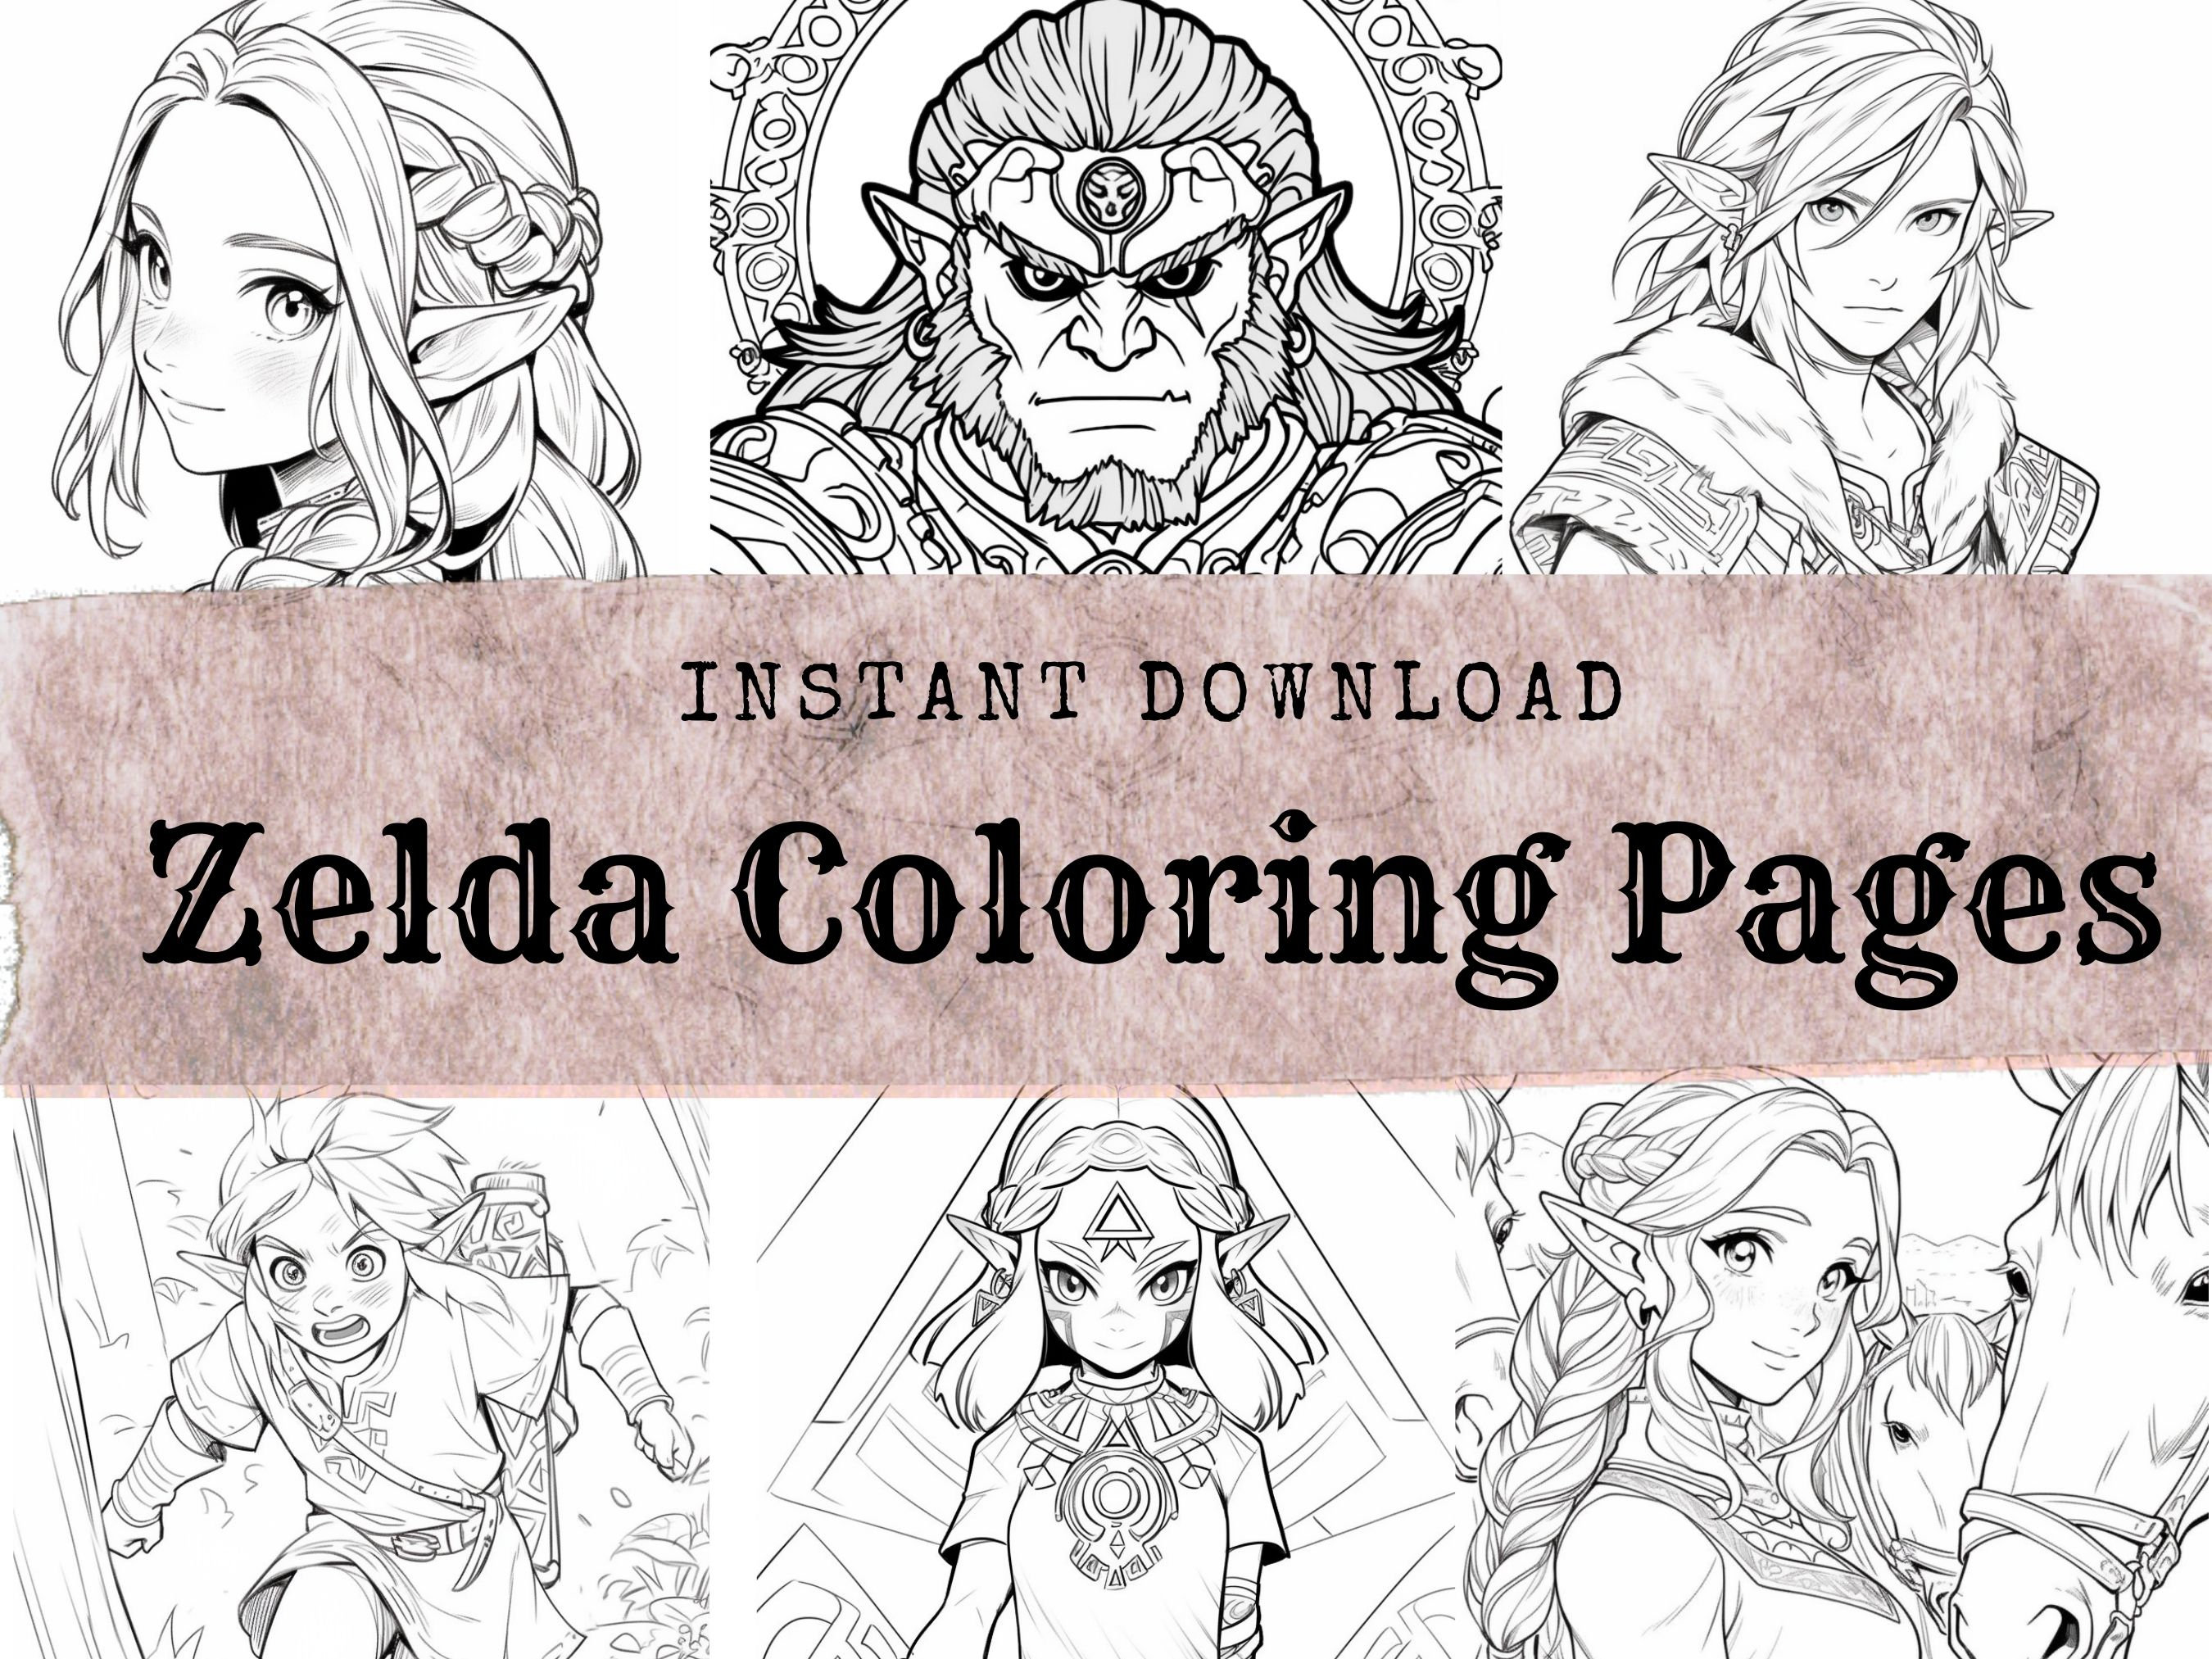 Enchanting legend of zelda coloring book explore hyrules magic printable zelda coloring pages fun for kids and adults by moodpixels